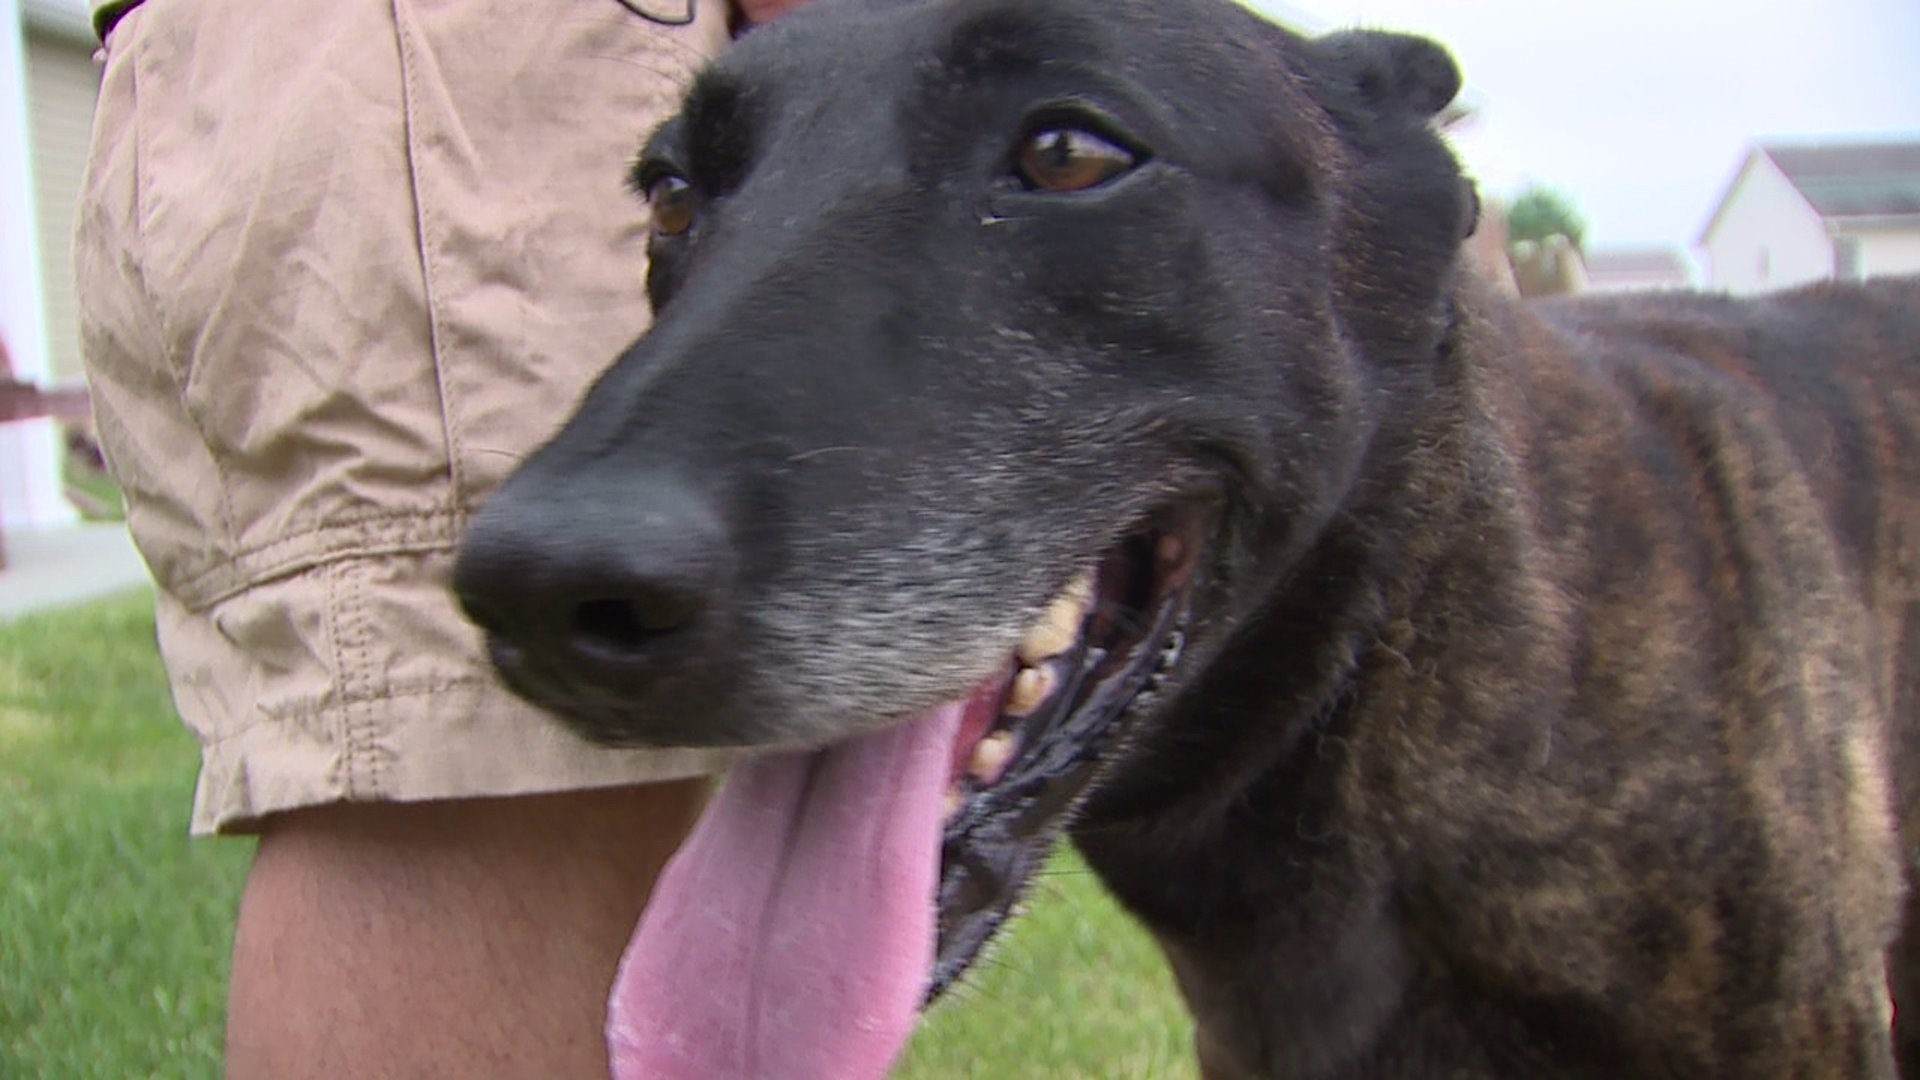 Jackson County K9 retired earlier than expected